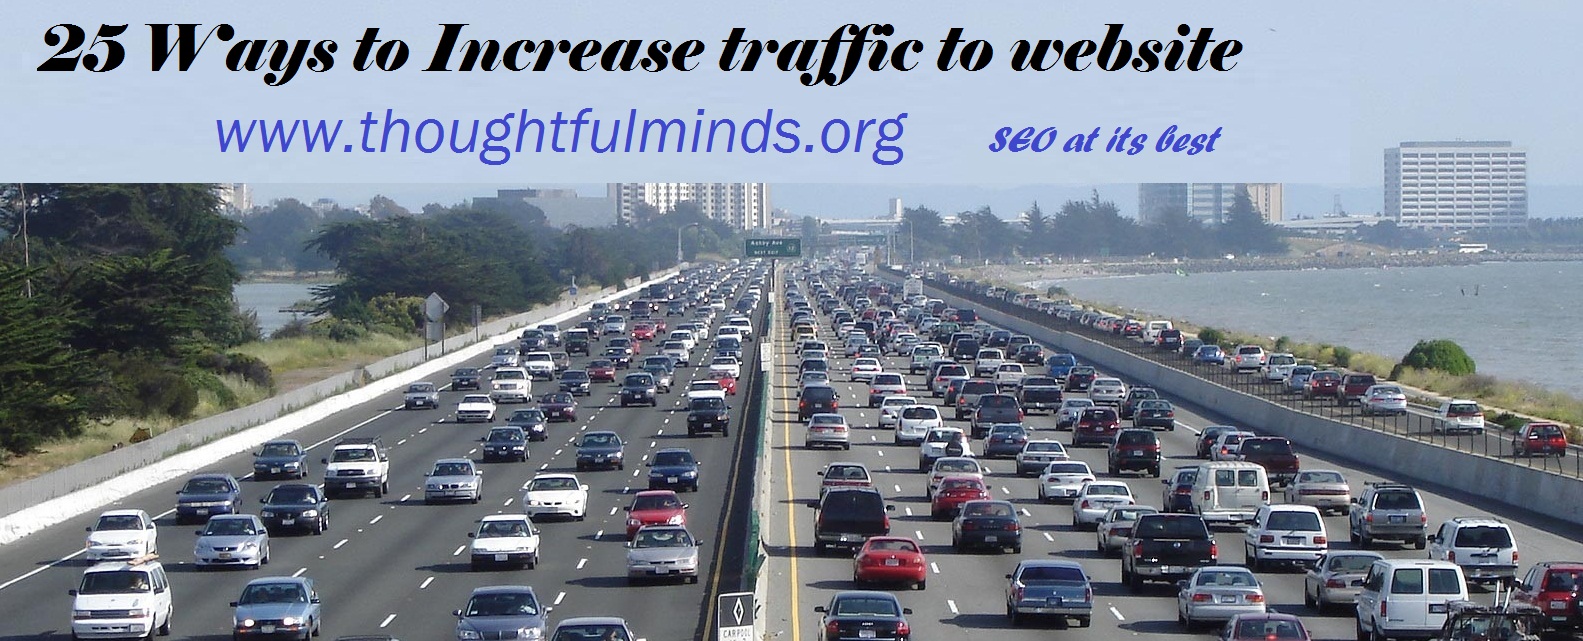 how to increase traffic to website